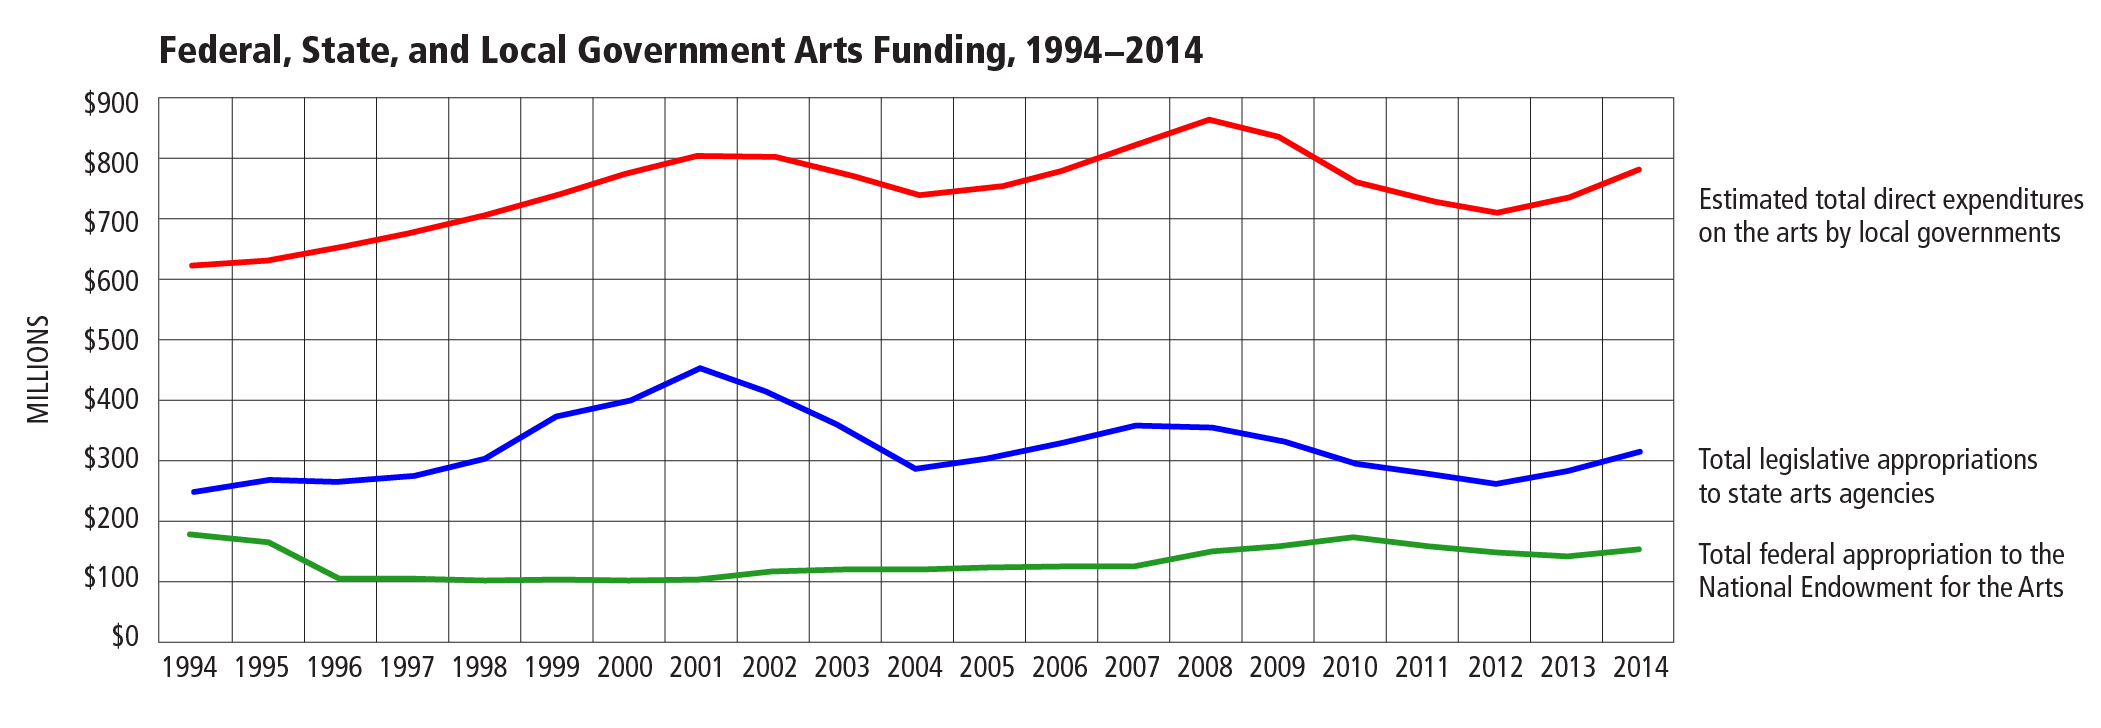 Federal, State, and Local Government Arts Funding, 1994-2014